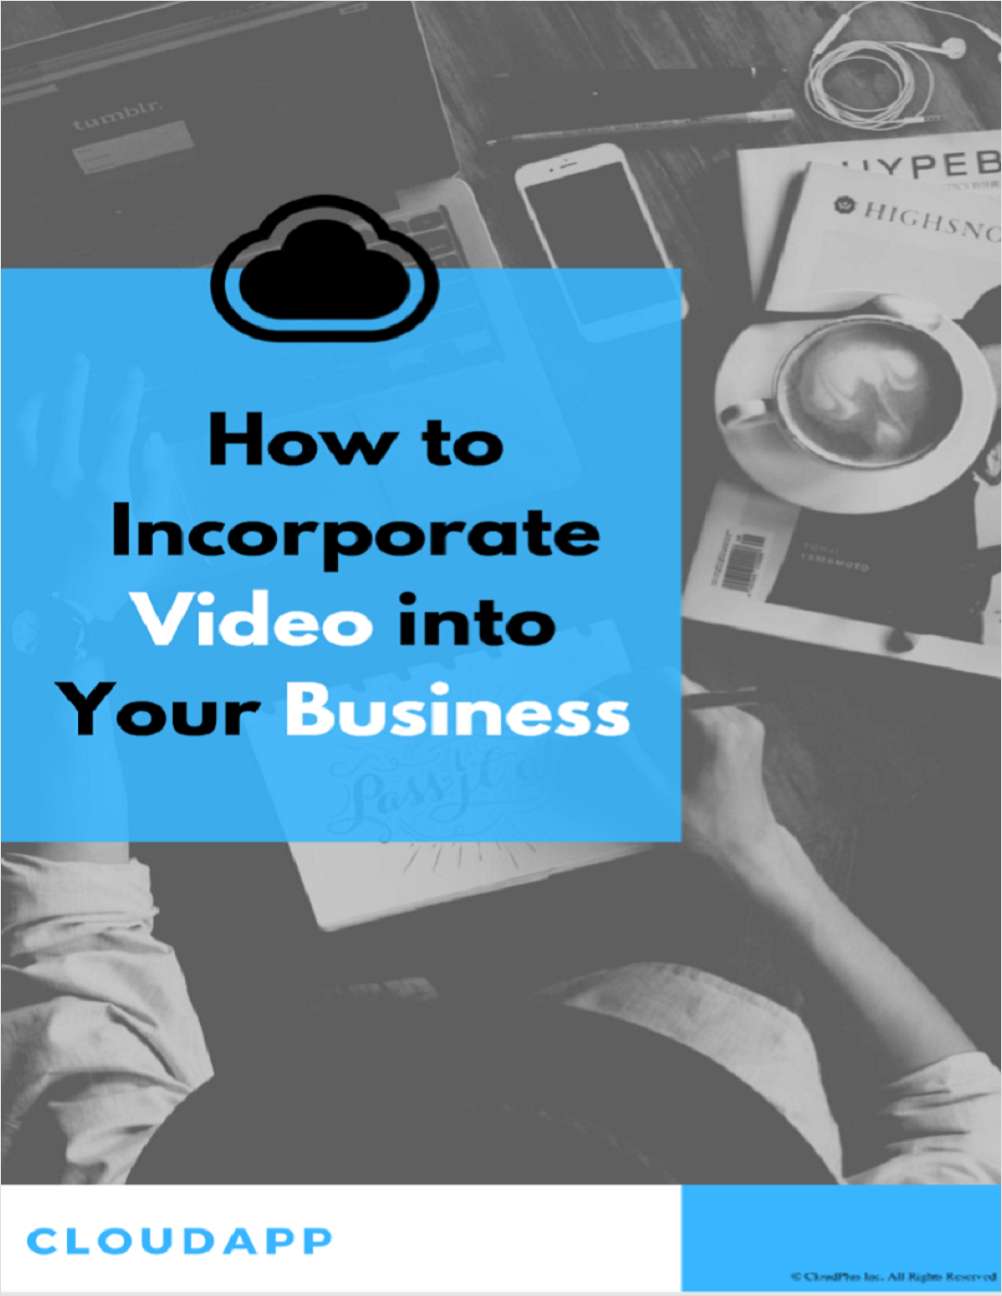 How to Incorporate Video into Your Business